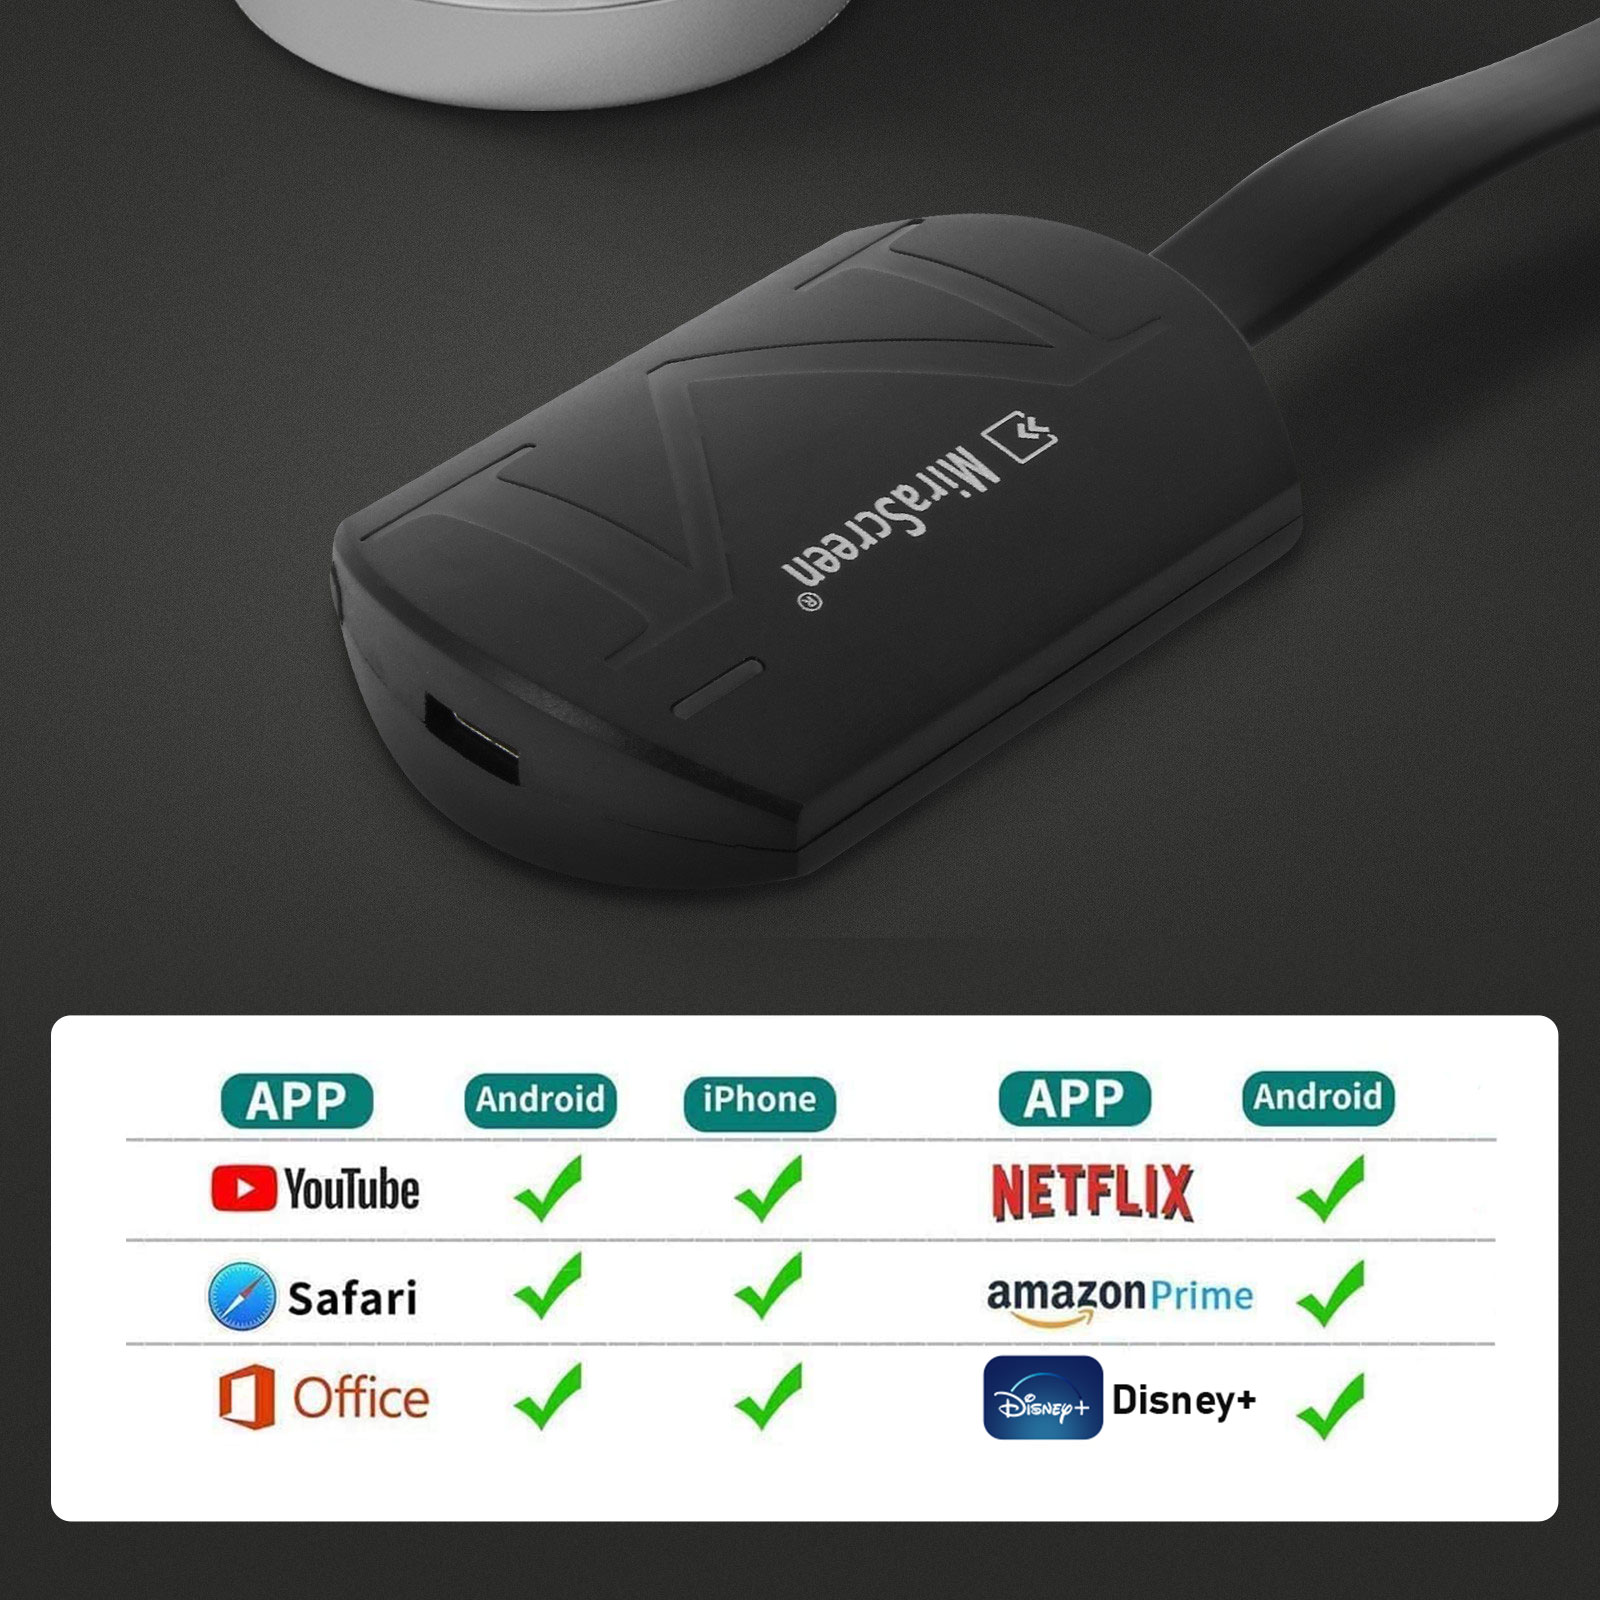 Dongle HDMI 1080p WiFi Inalámbrico TV Monitor Proyector (Miracast, AirPlay,  DLNA) - Spain